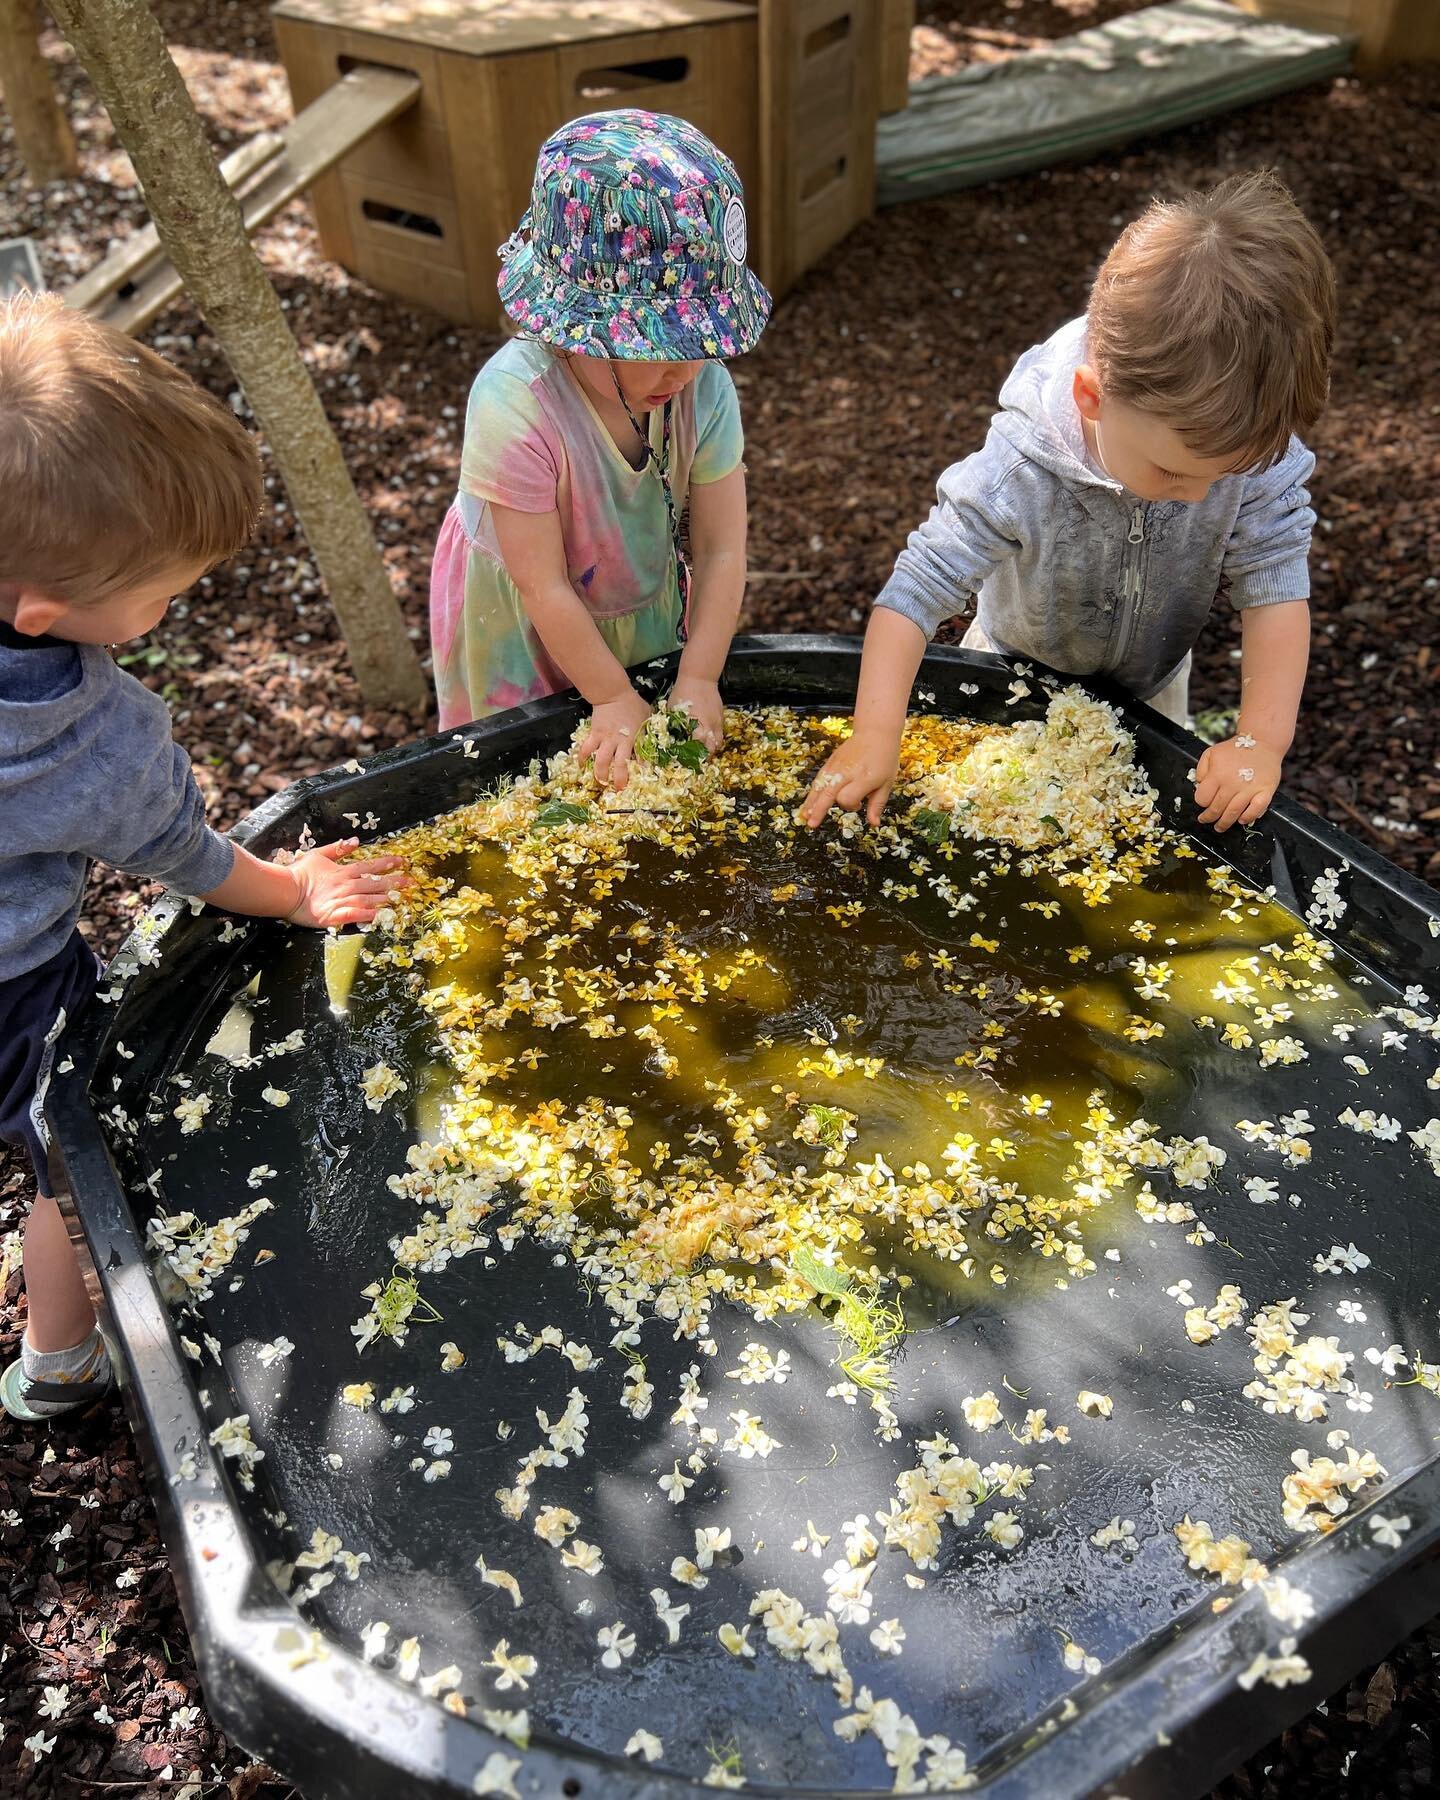 A lovely natural sensory play experience this morning at Fledglings. This invitation to play is new season flowers, water and a dash of yellow dye. This learning experience promotes fine motor skills, curiosity and understandings of the seasons, worl